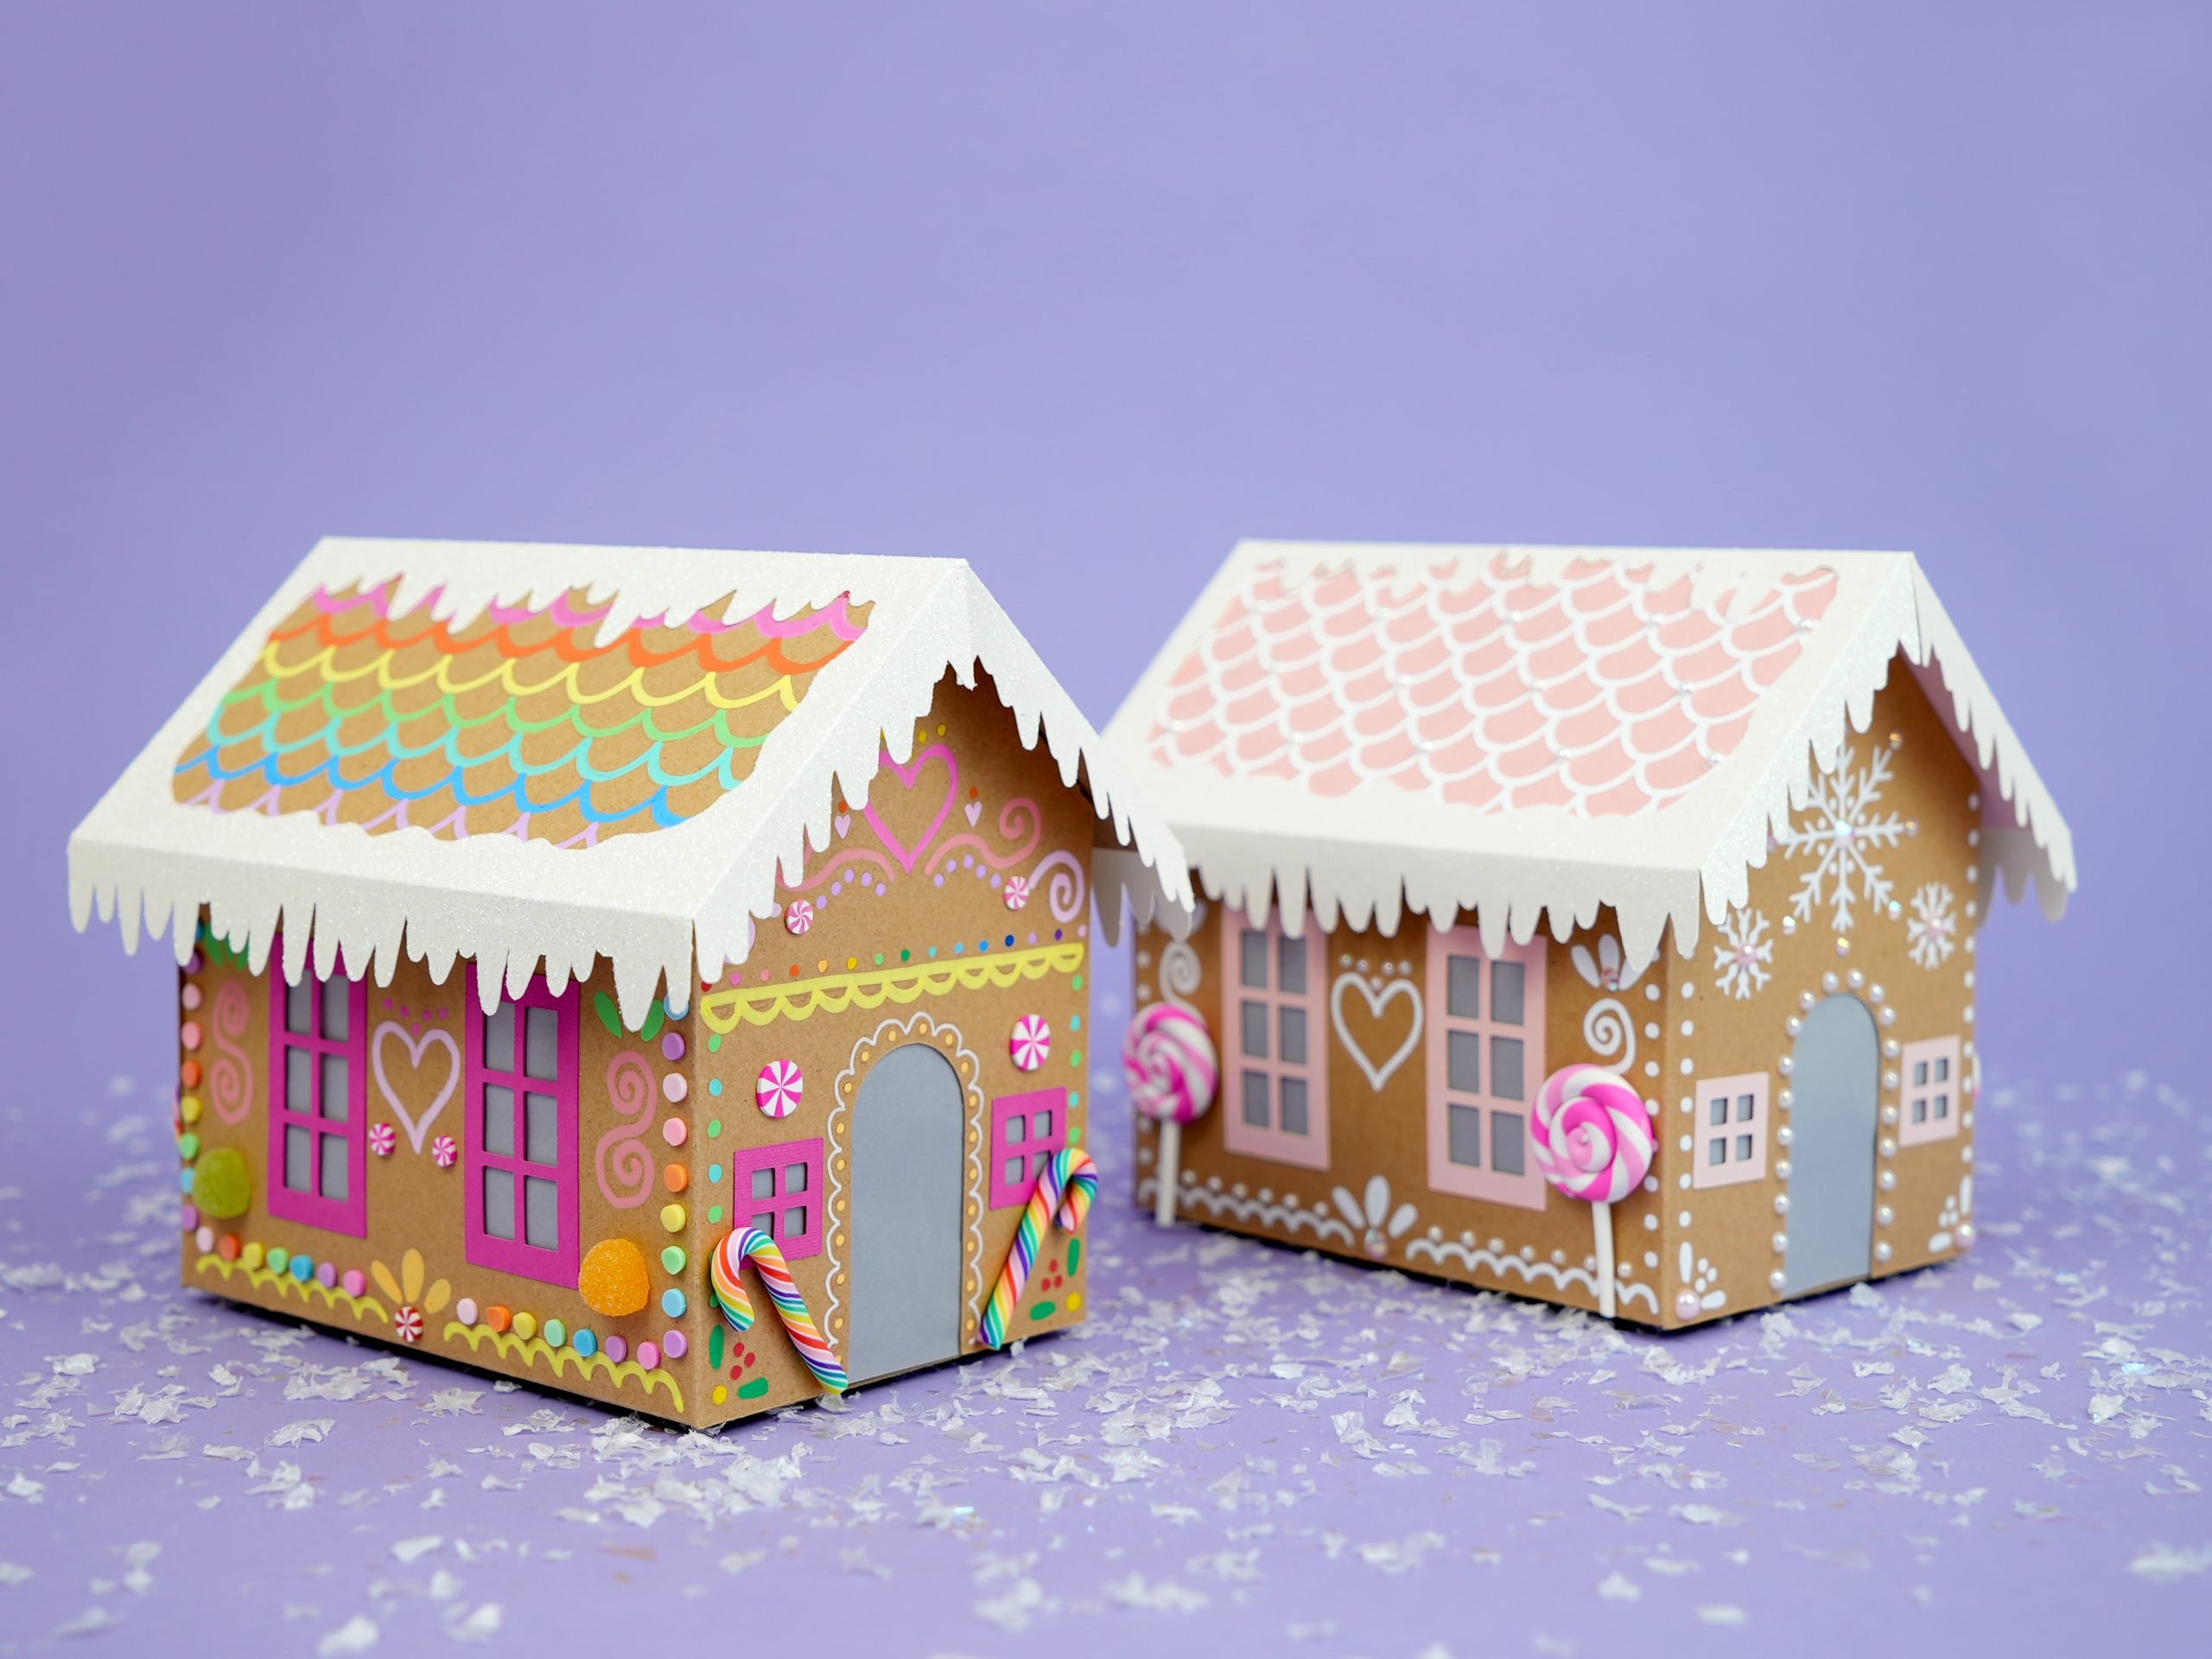 Two decorated paper gingerbread house on lavender background with faux snow